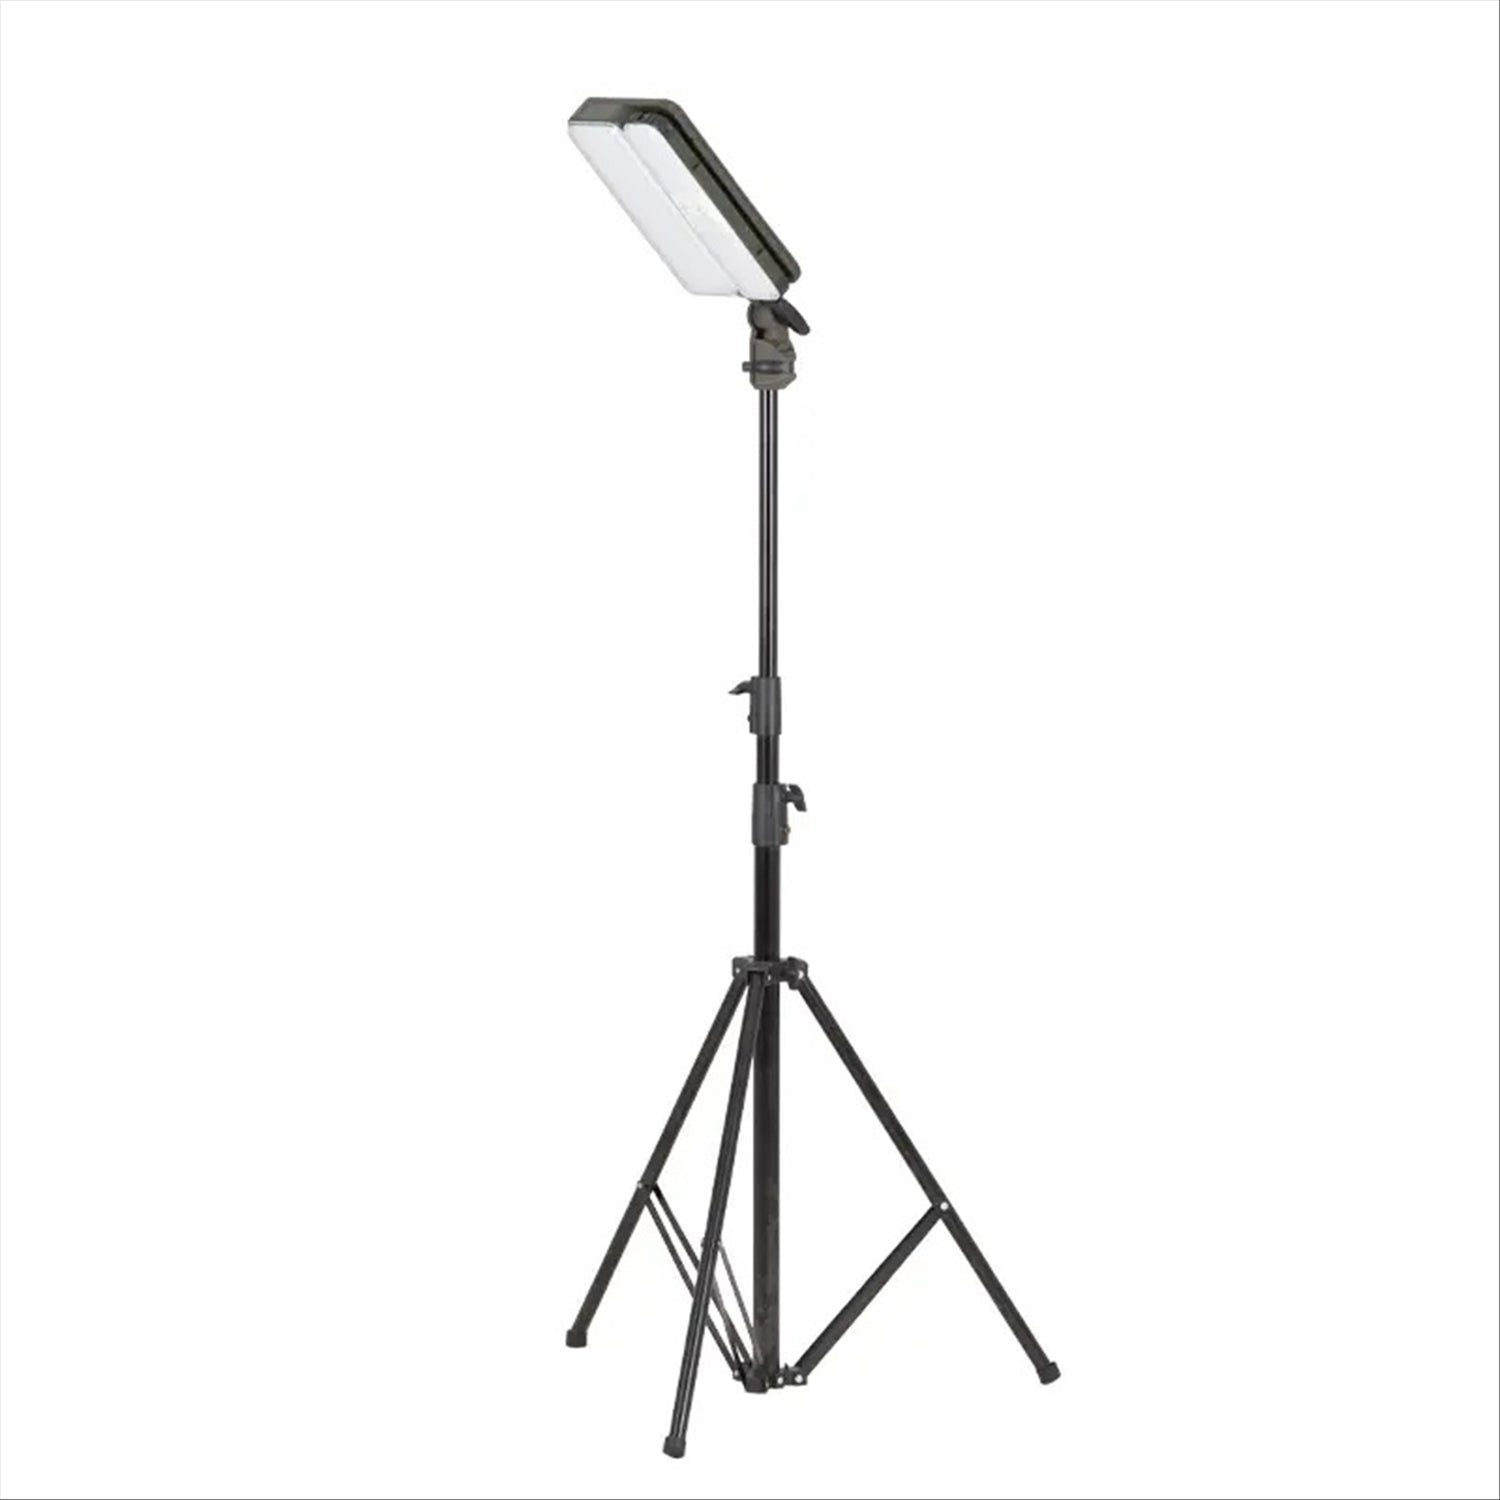 Wild Land Galaxy LED Solar Powered Lights with Tripod Stand